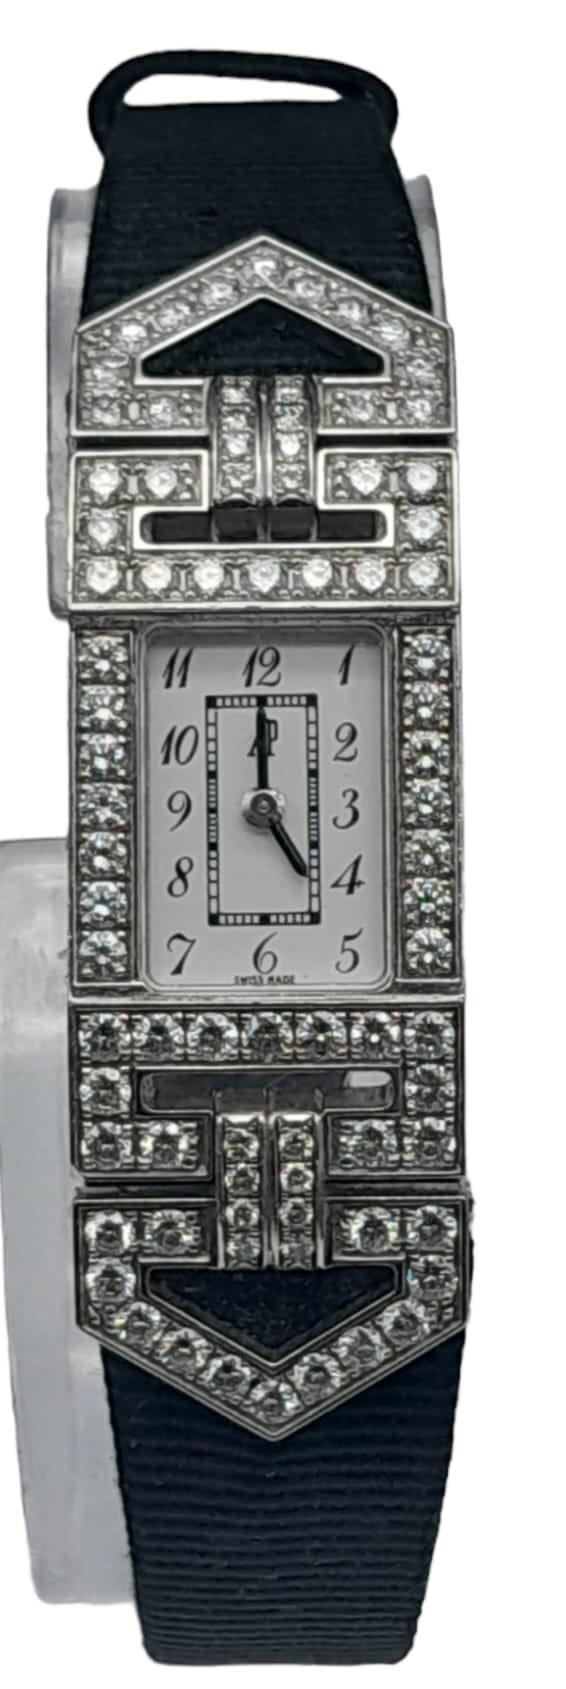 An 18K White Gold and Diamond Audemars Piguet Ladies Watch. Black leather strap with an 18k gold